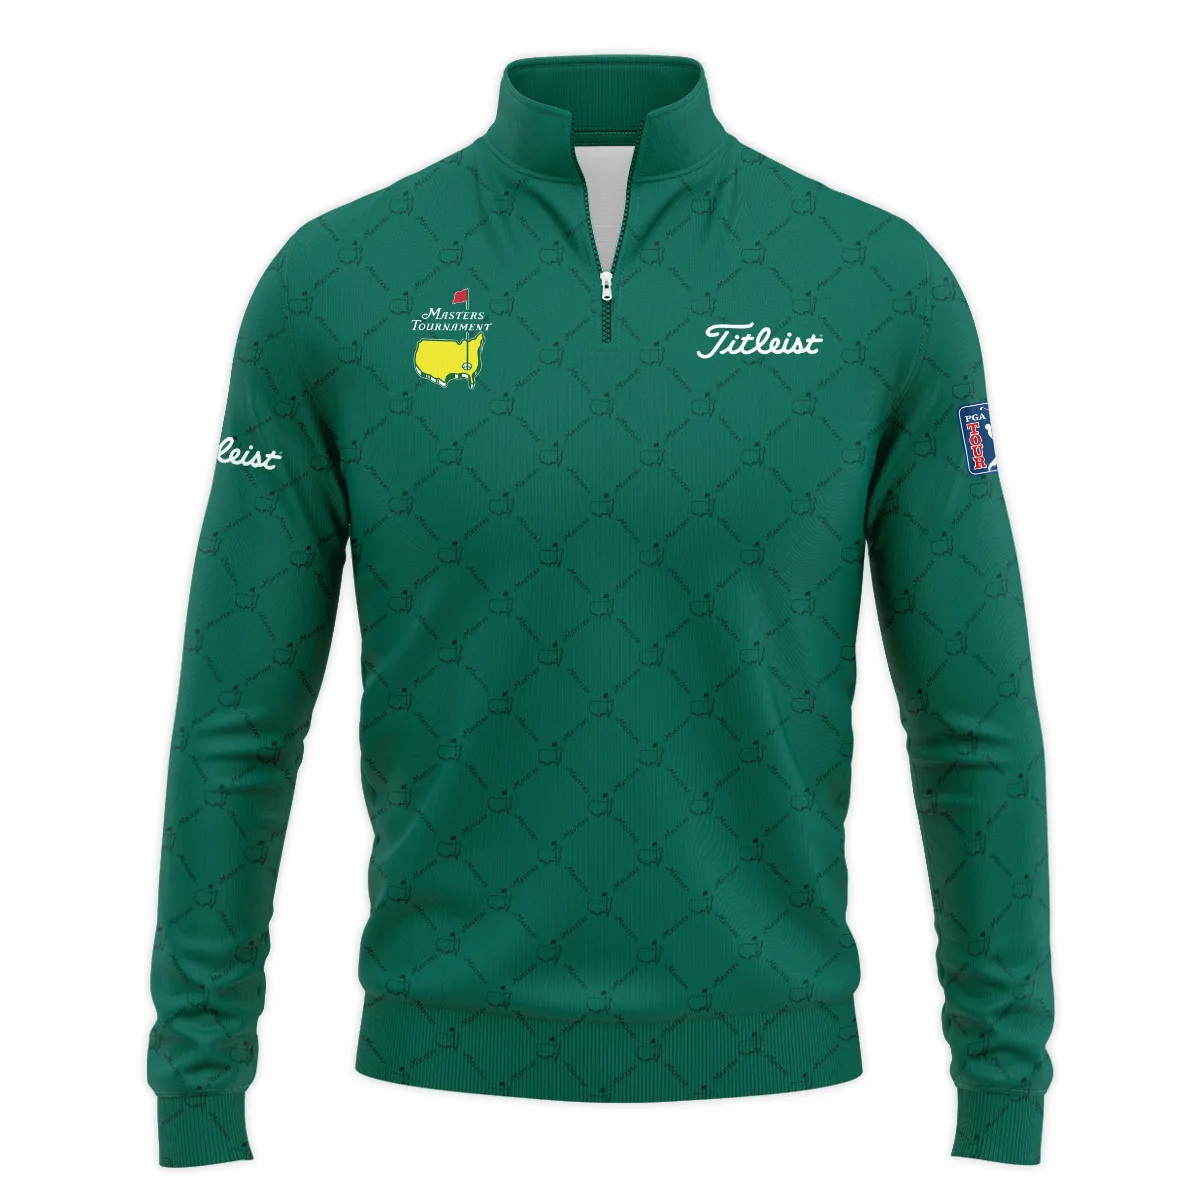 Golf Sport Pattern Color Green Mix Black Masters Tournament Titleist Hoodie Shirt Style Classic